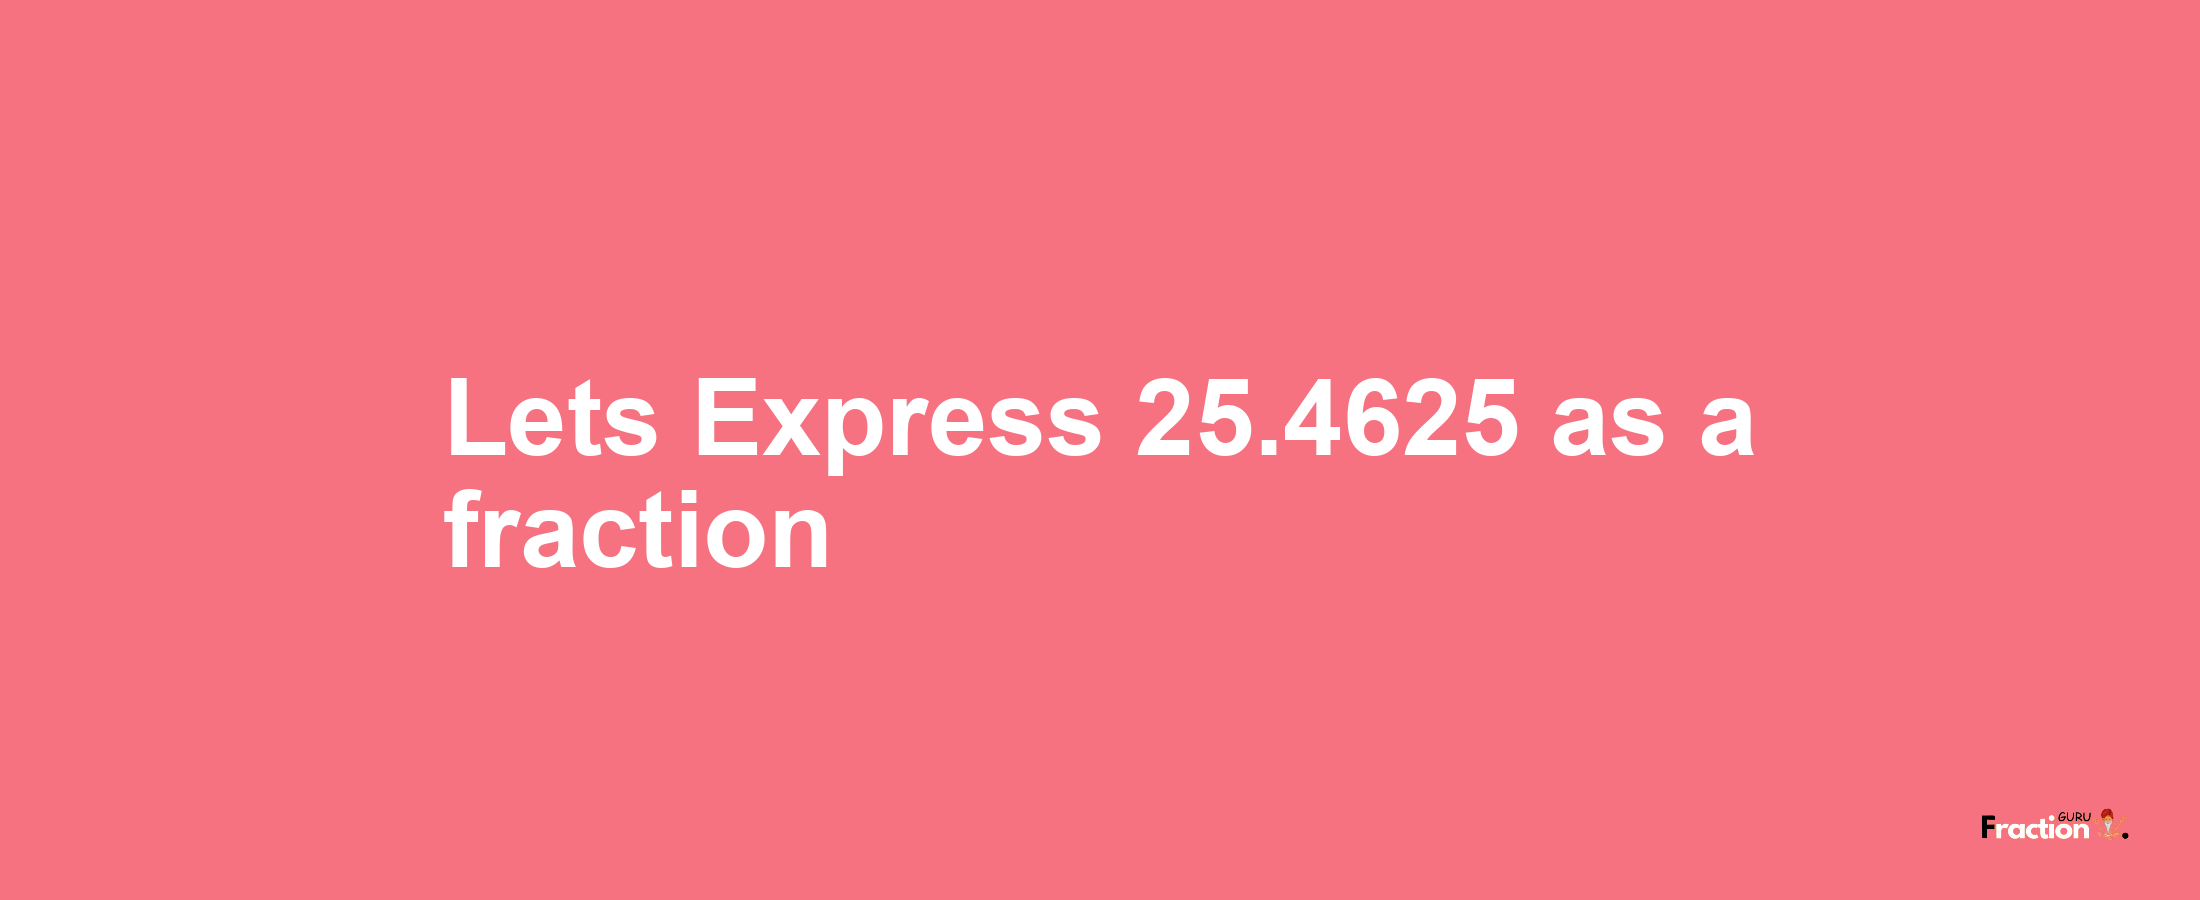 Lets Express 25.4625 as afraction